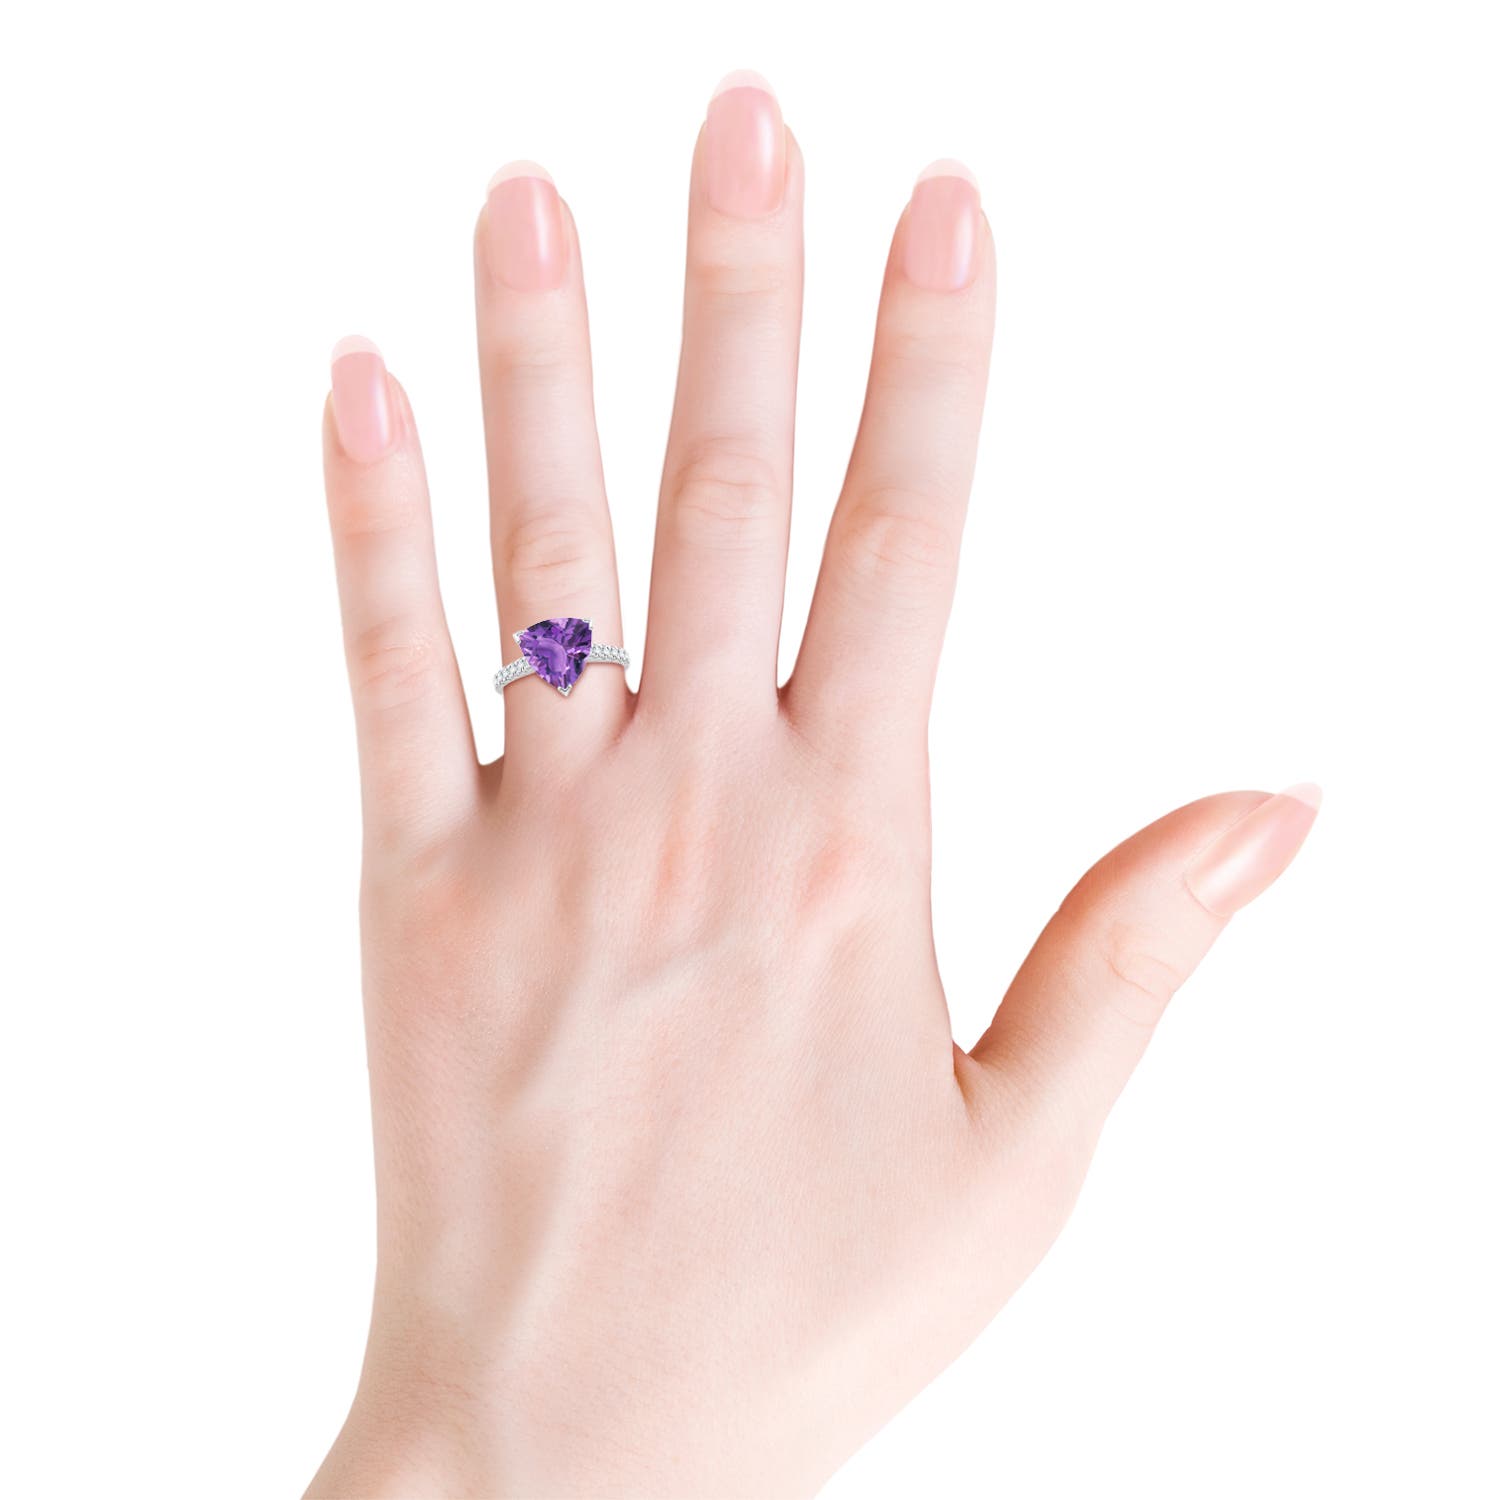 AA - Amethyst / 2.95 CT / 14 KT White Gold